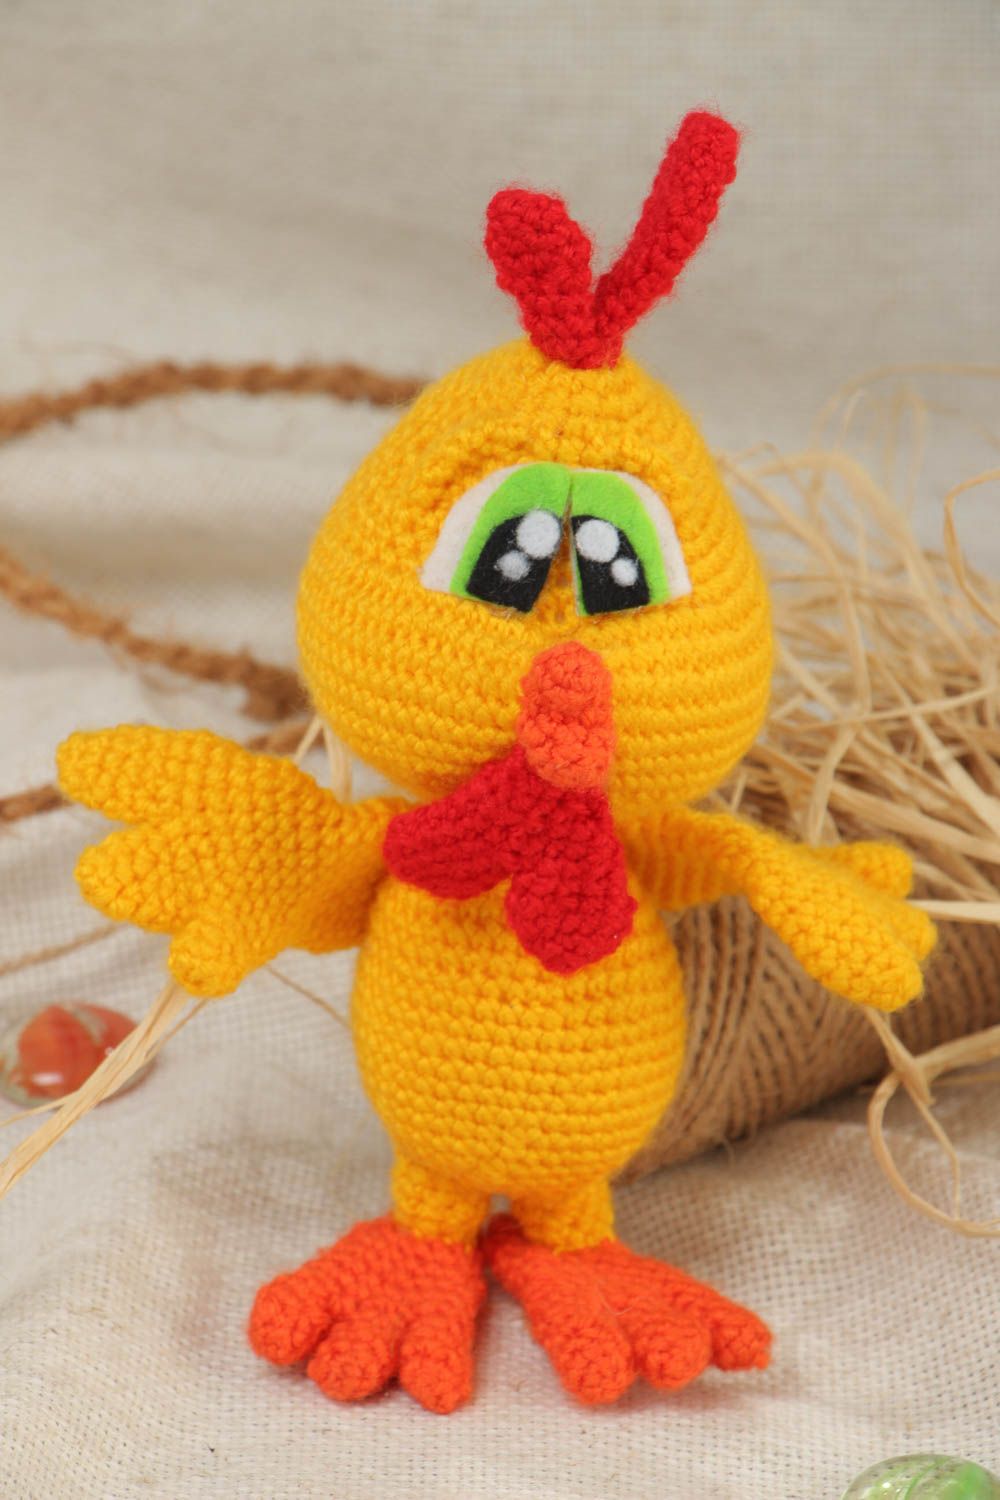 Handmade soft toy crocheted of acrylic threads in the shape of yellow chicken photo 1